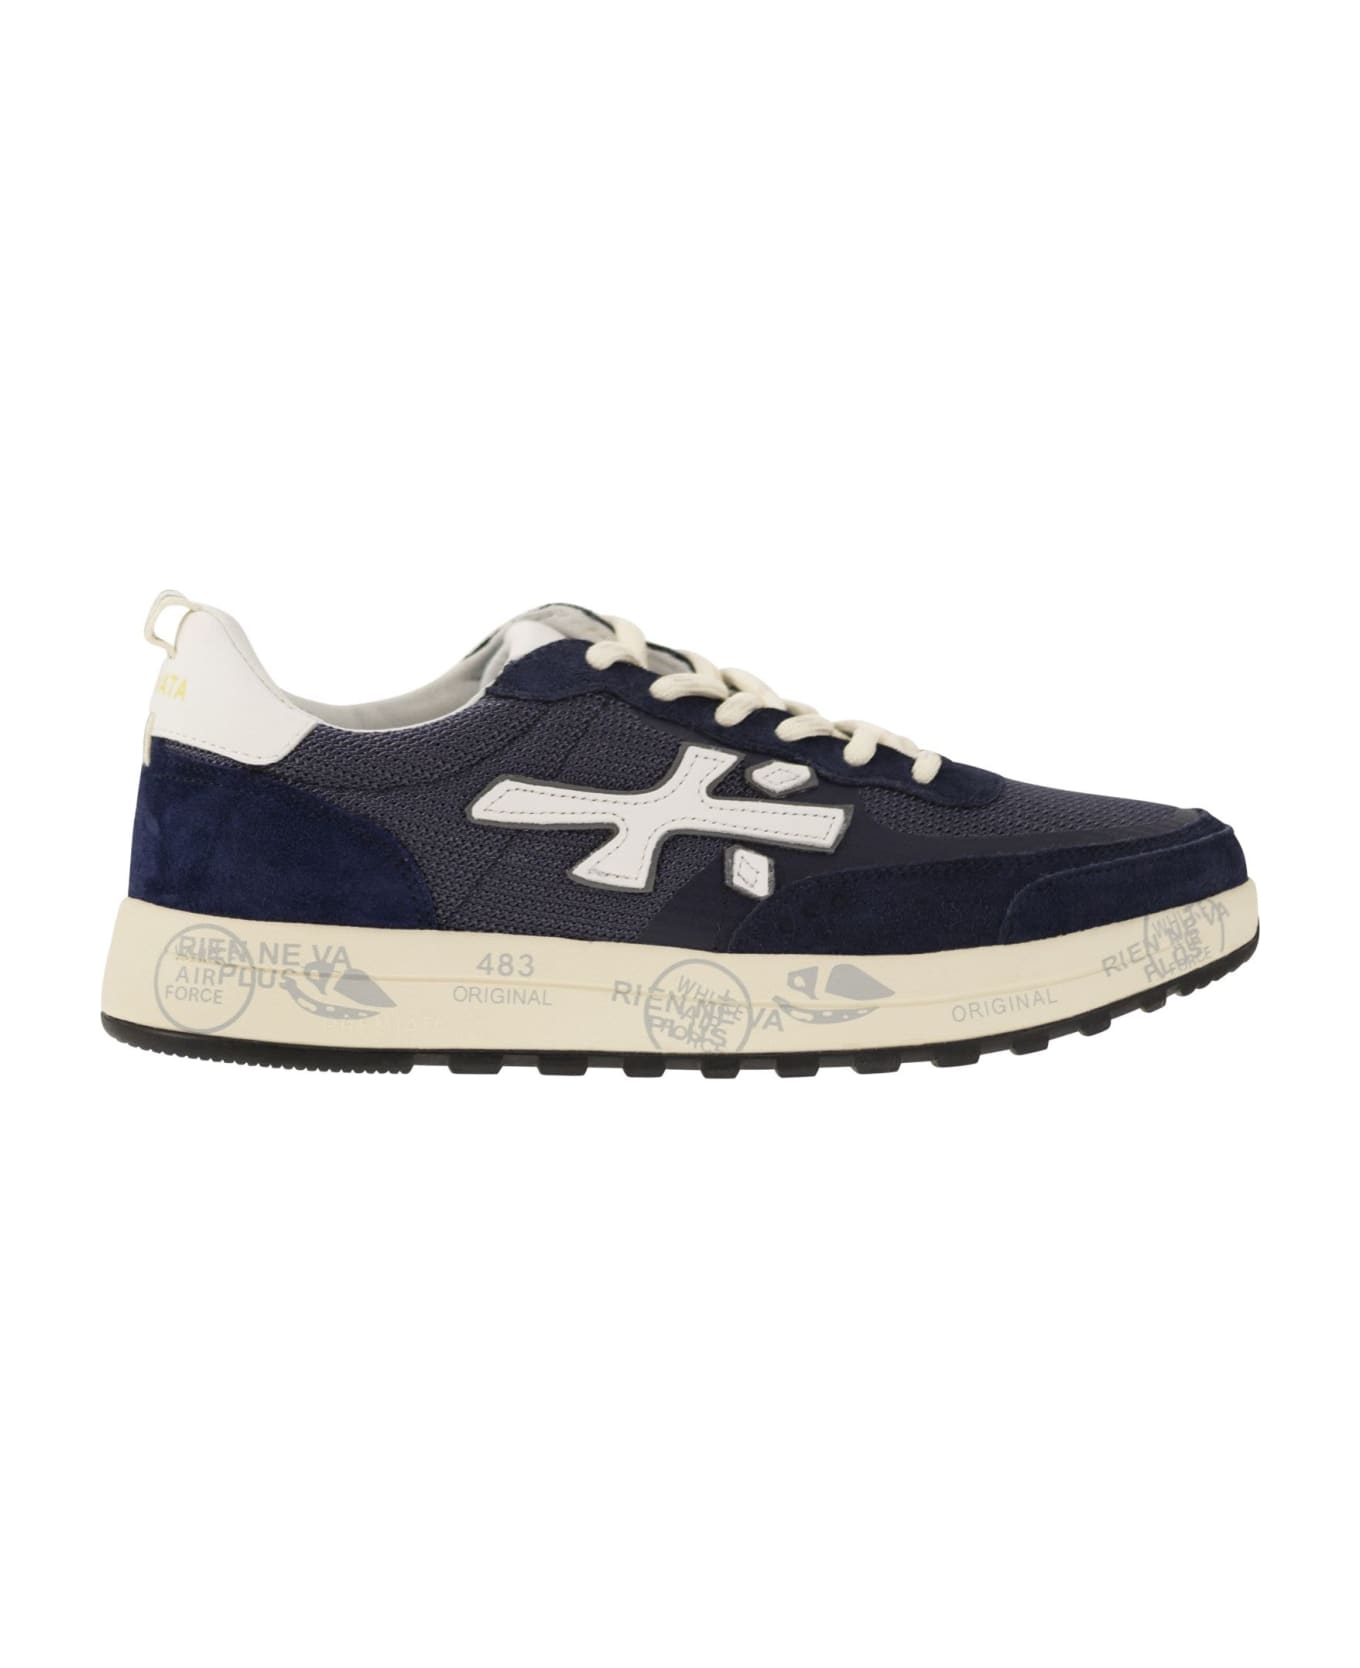 Premiata 'nous' Blue Leather And Fabric Sneakers - Blue